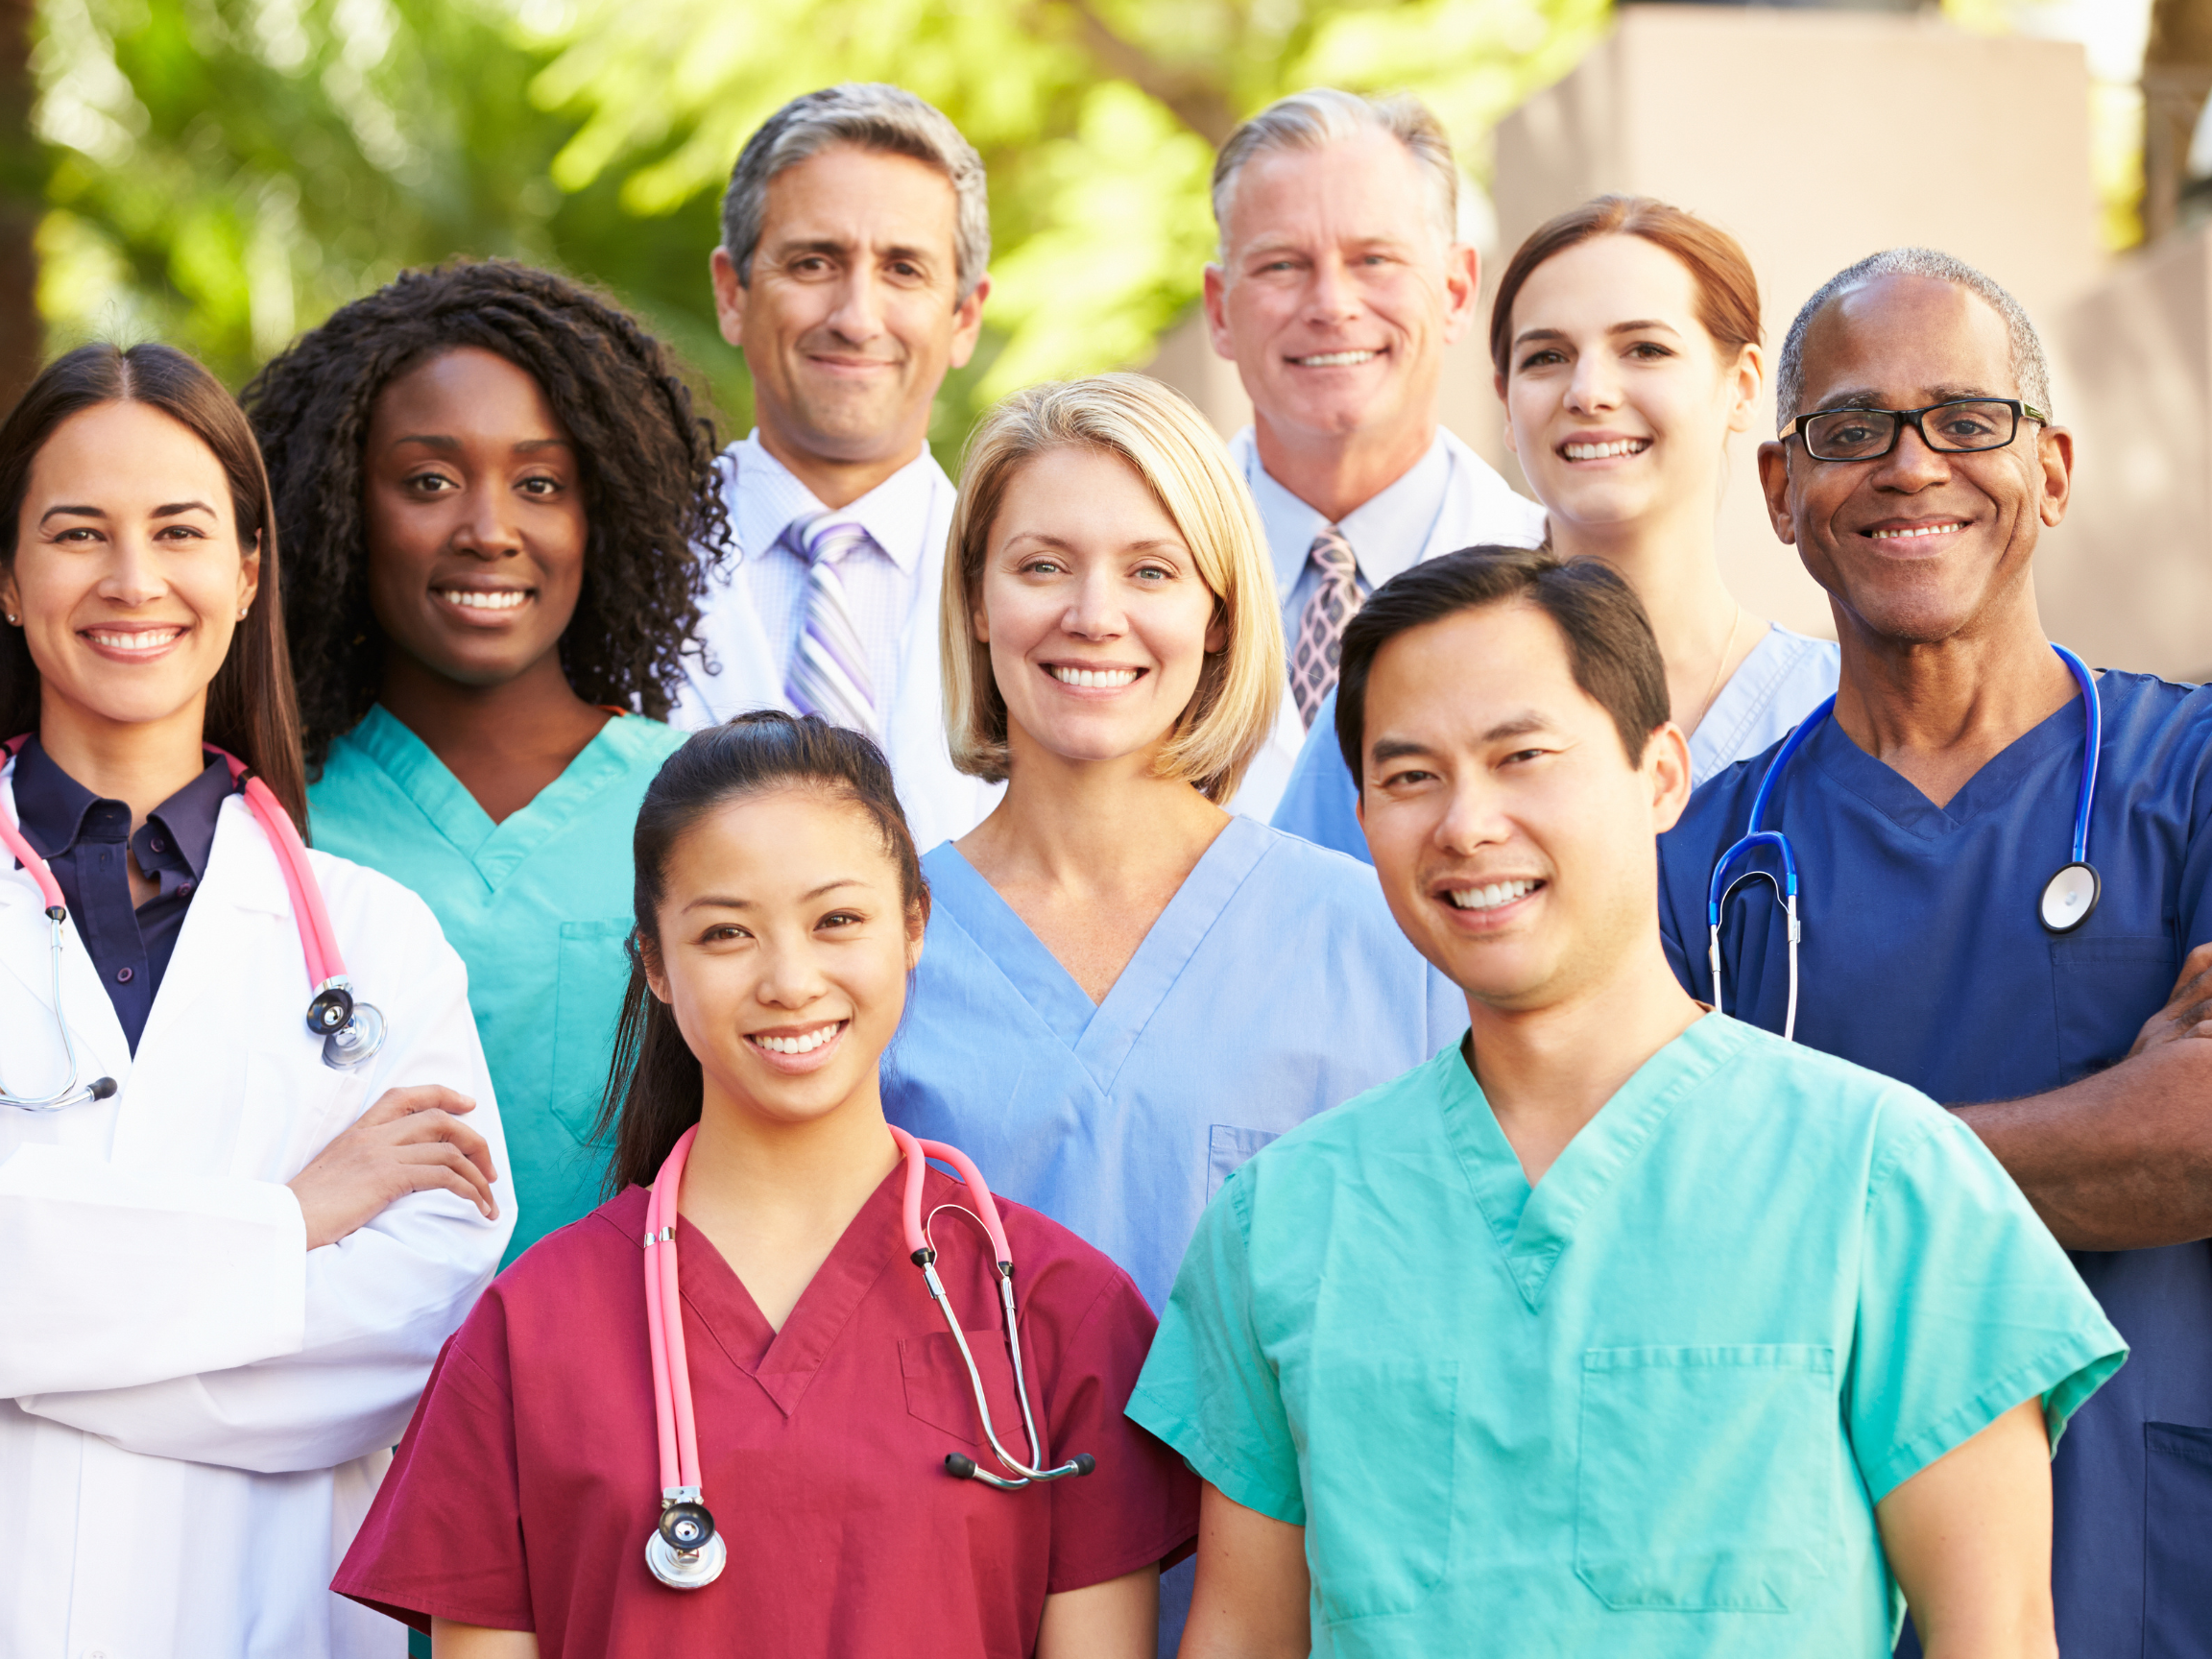 A group of healthcare professionals